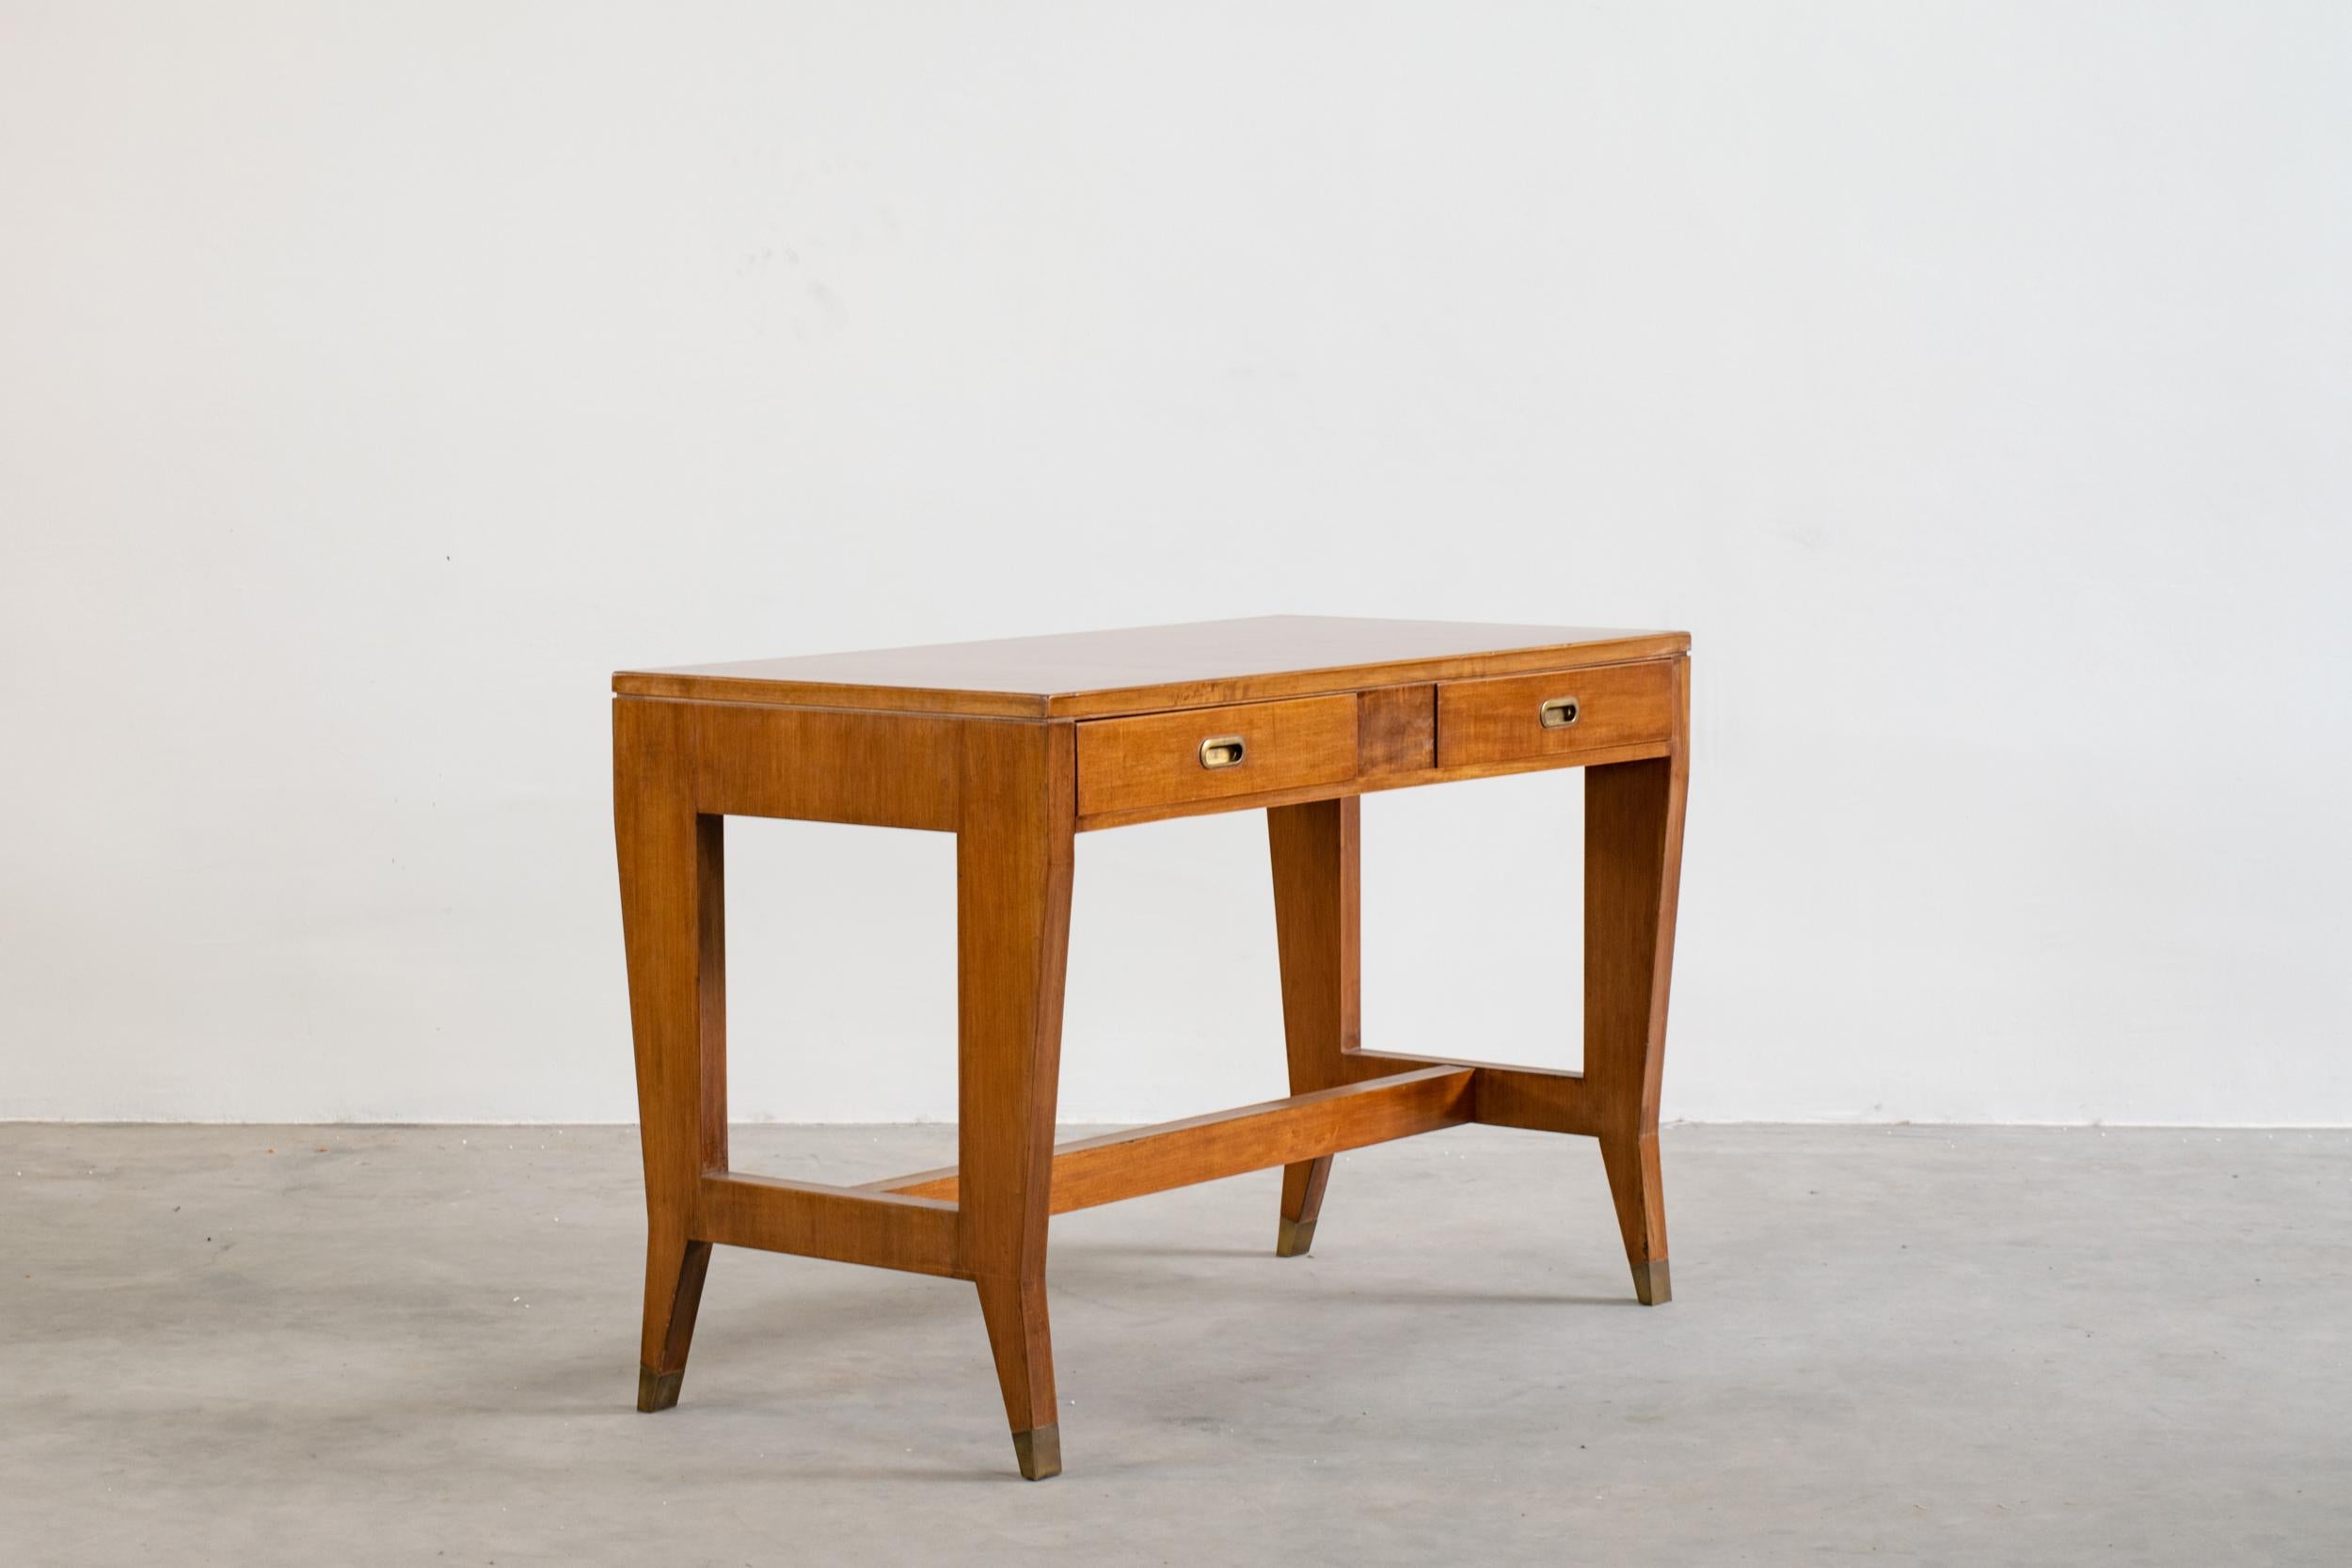 Executive desk with two frontal drawers, with structure in walnut wood, top in laminate and brass details (handles and feet) designed by Gio Ponti for the offices of BNL (Banca Nazionale del Lavoro) and manufactured by the Italian Company Schirolli